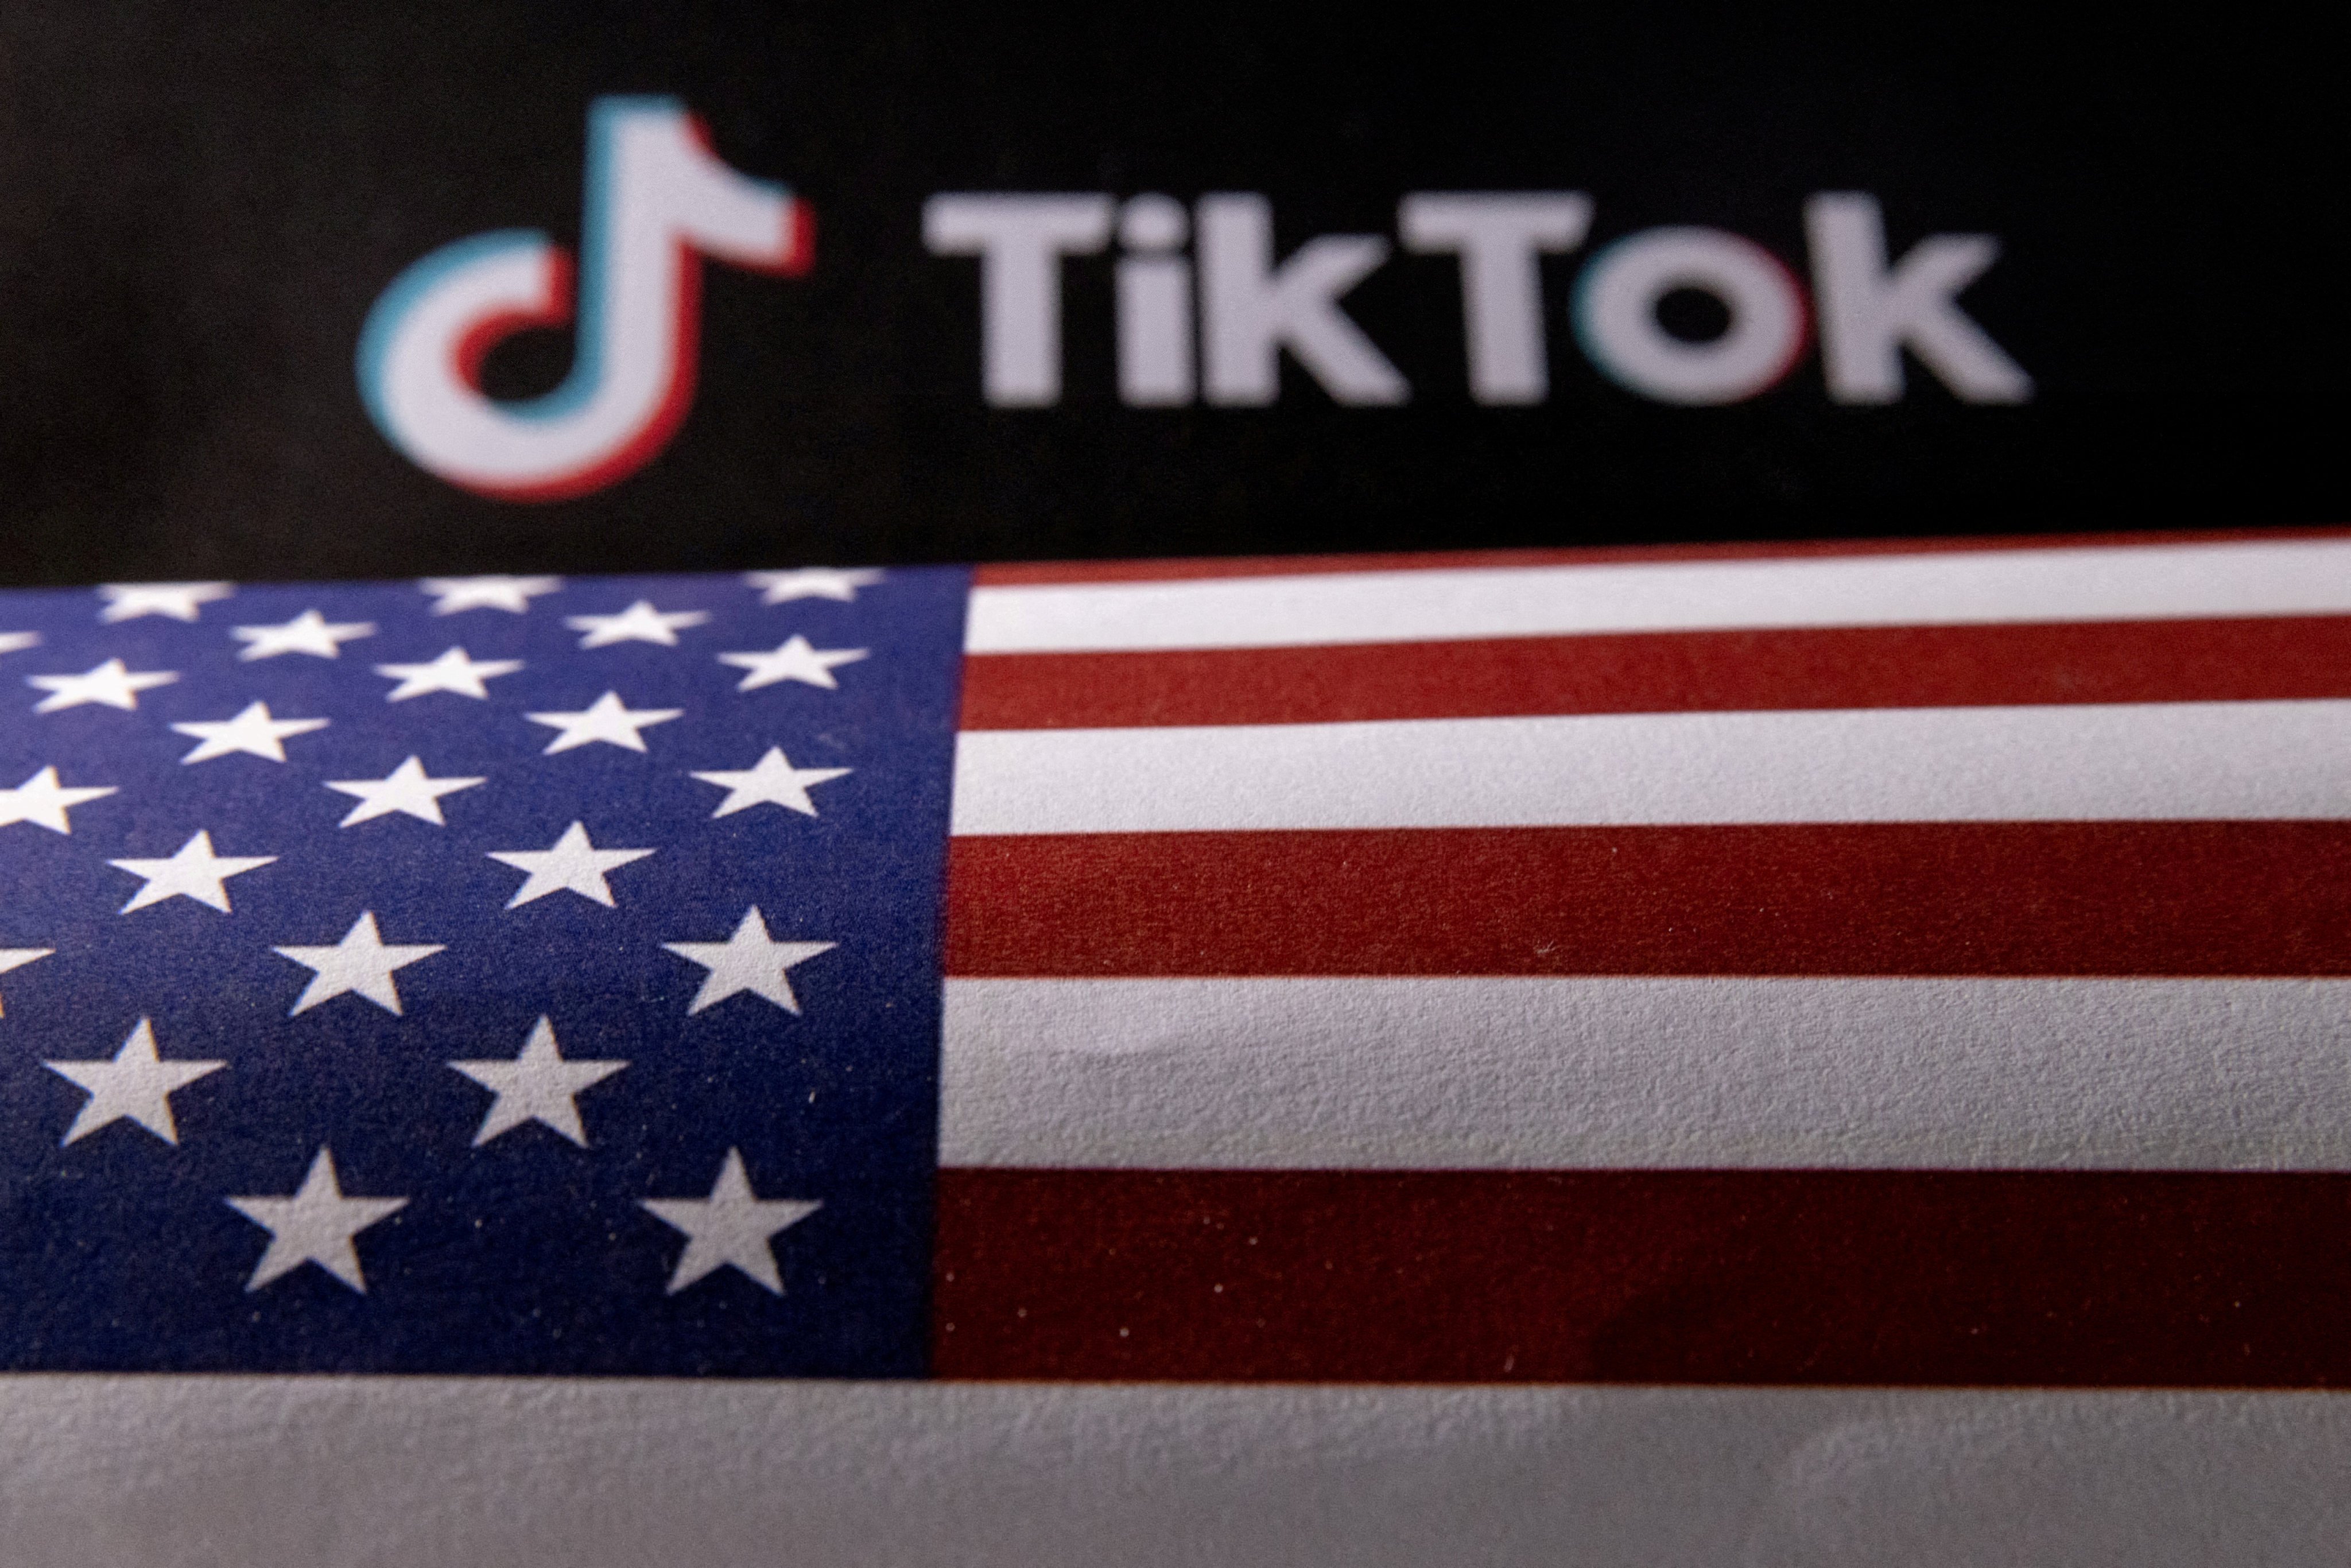 Before the vote, US lawmakers got a closed-door classified briefing on national security concerns about TikTok’s Chinese ownership. Image: Reuters